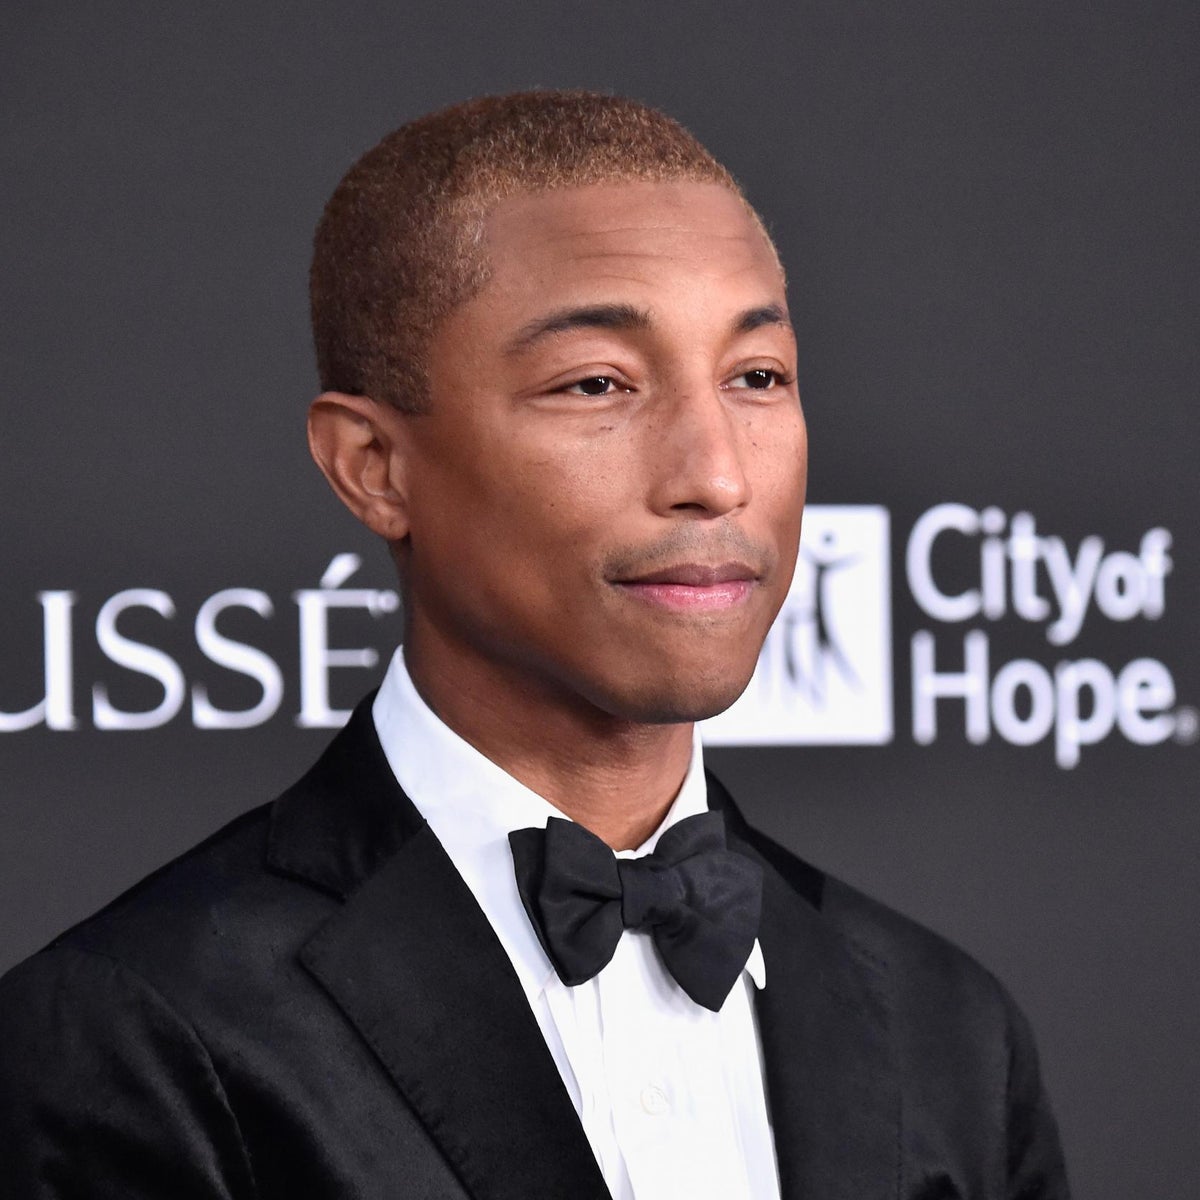 Pharrell says backlash to Blurred Lines made him realise 'we live